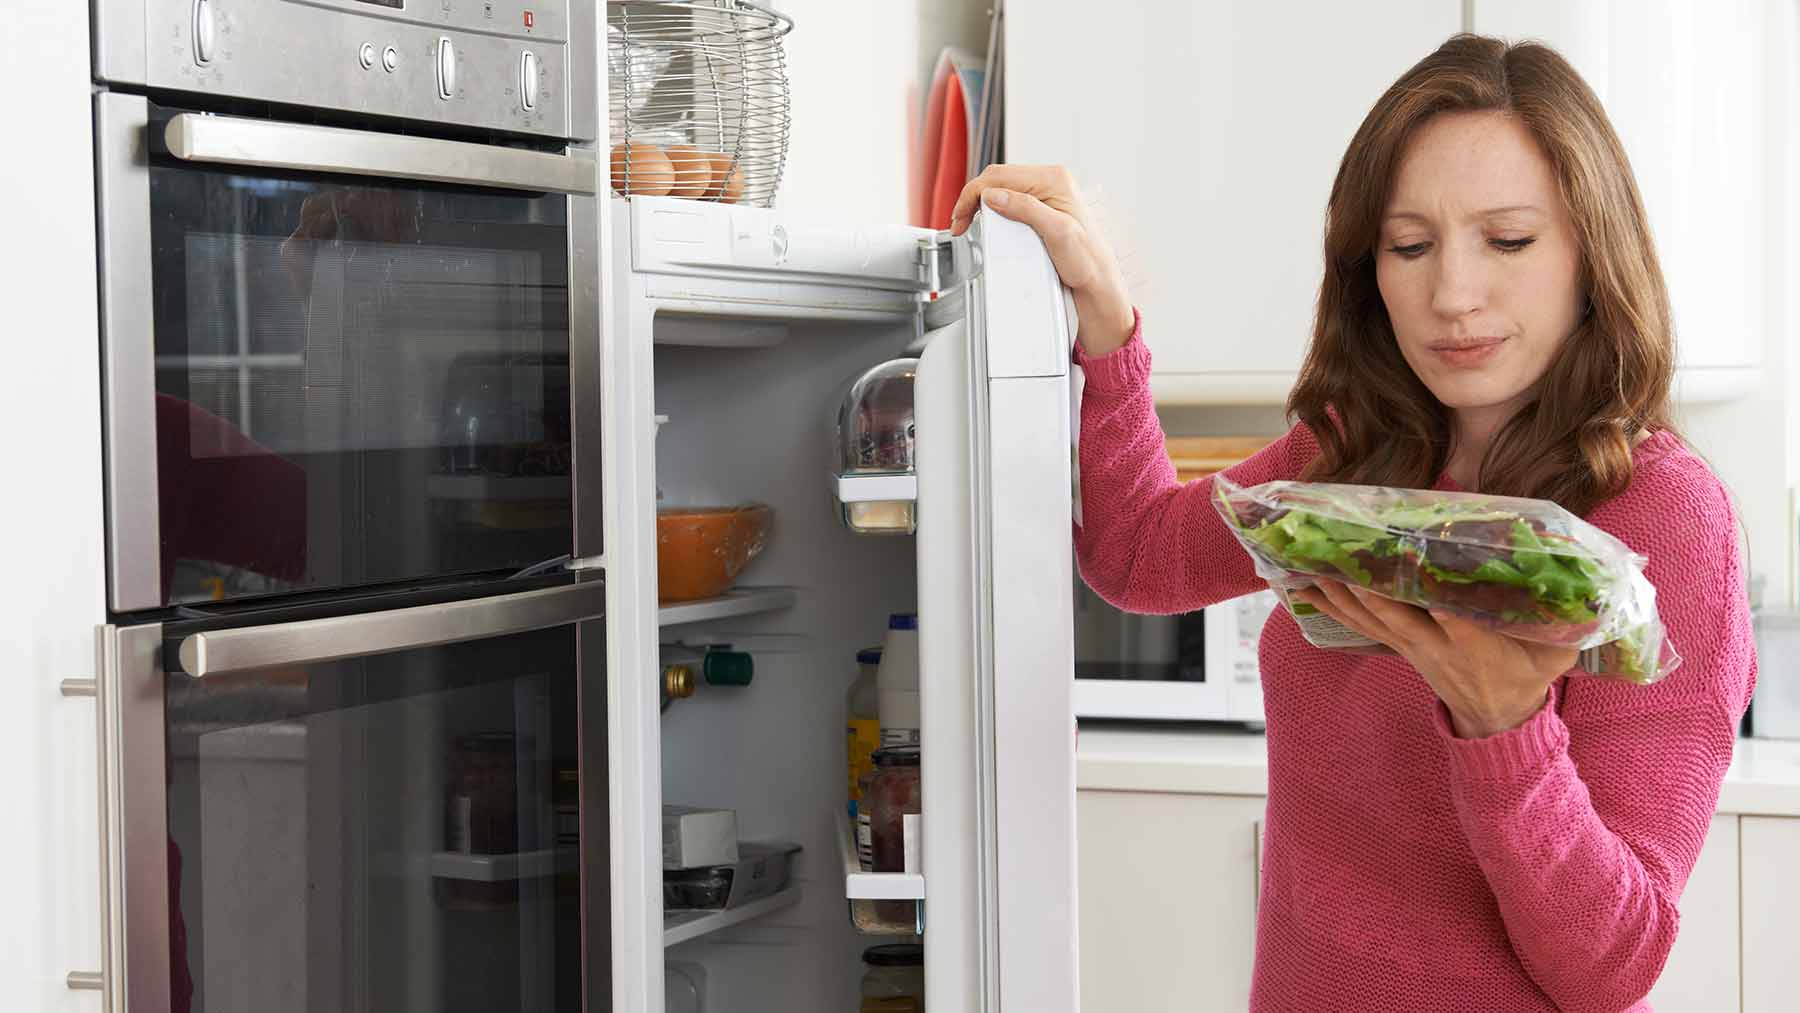 woman looking at food label near open refrigerator